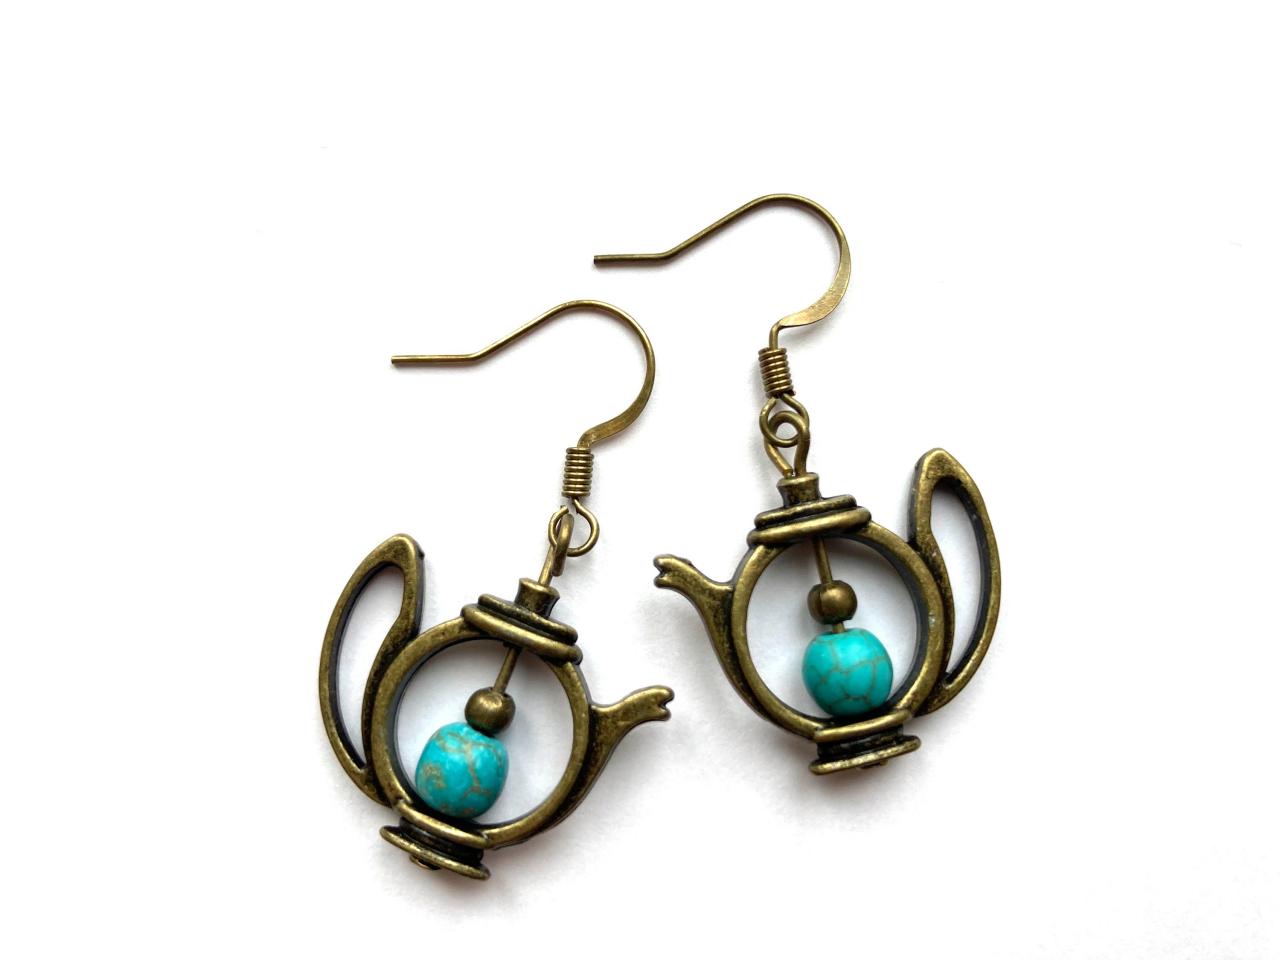 Alice in wonderland inspired brass teapot earrings with turquoise beads, Selma Dreams